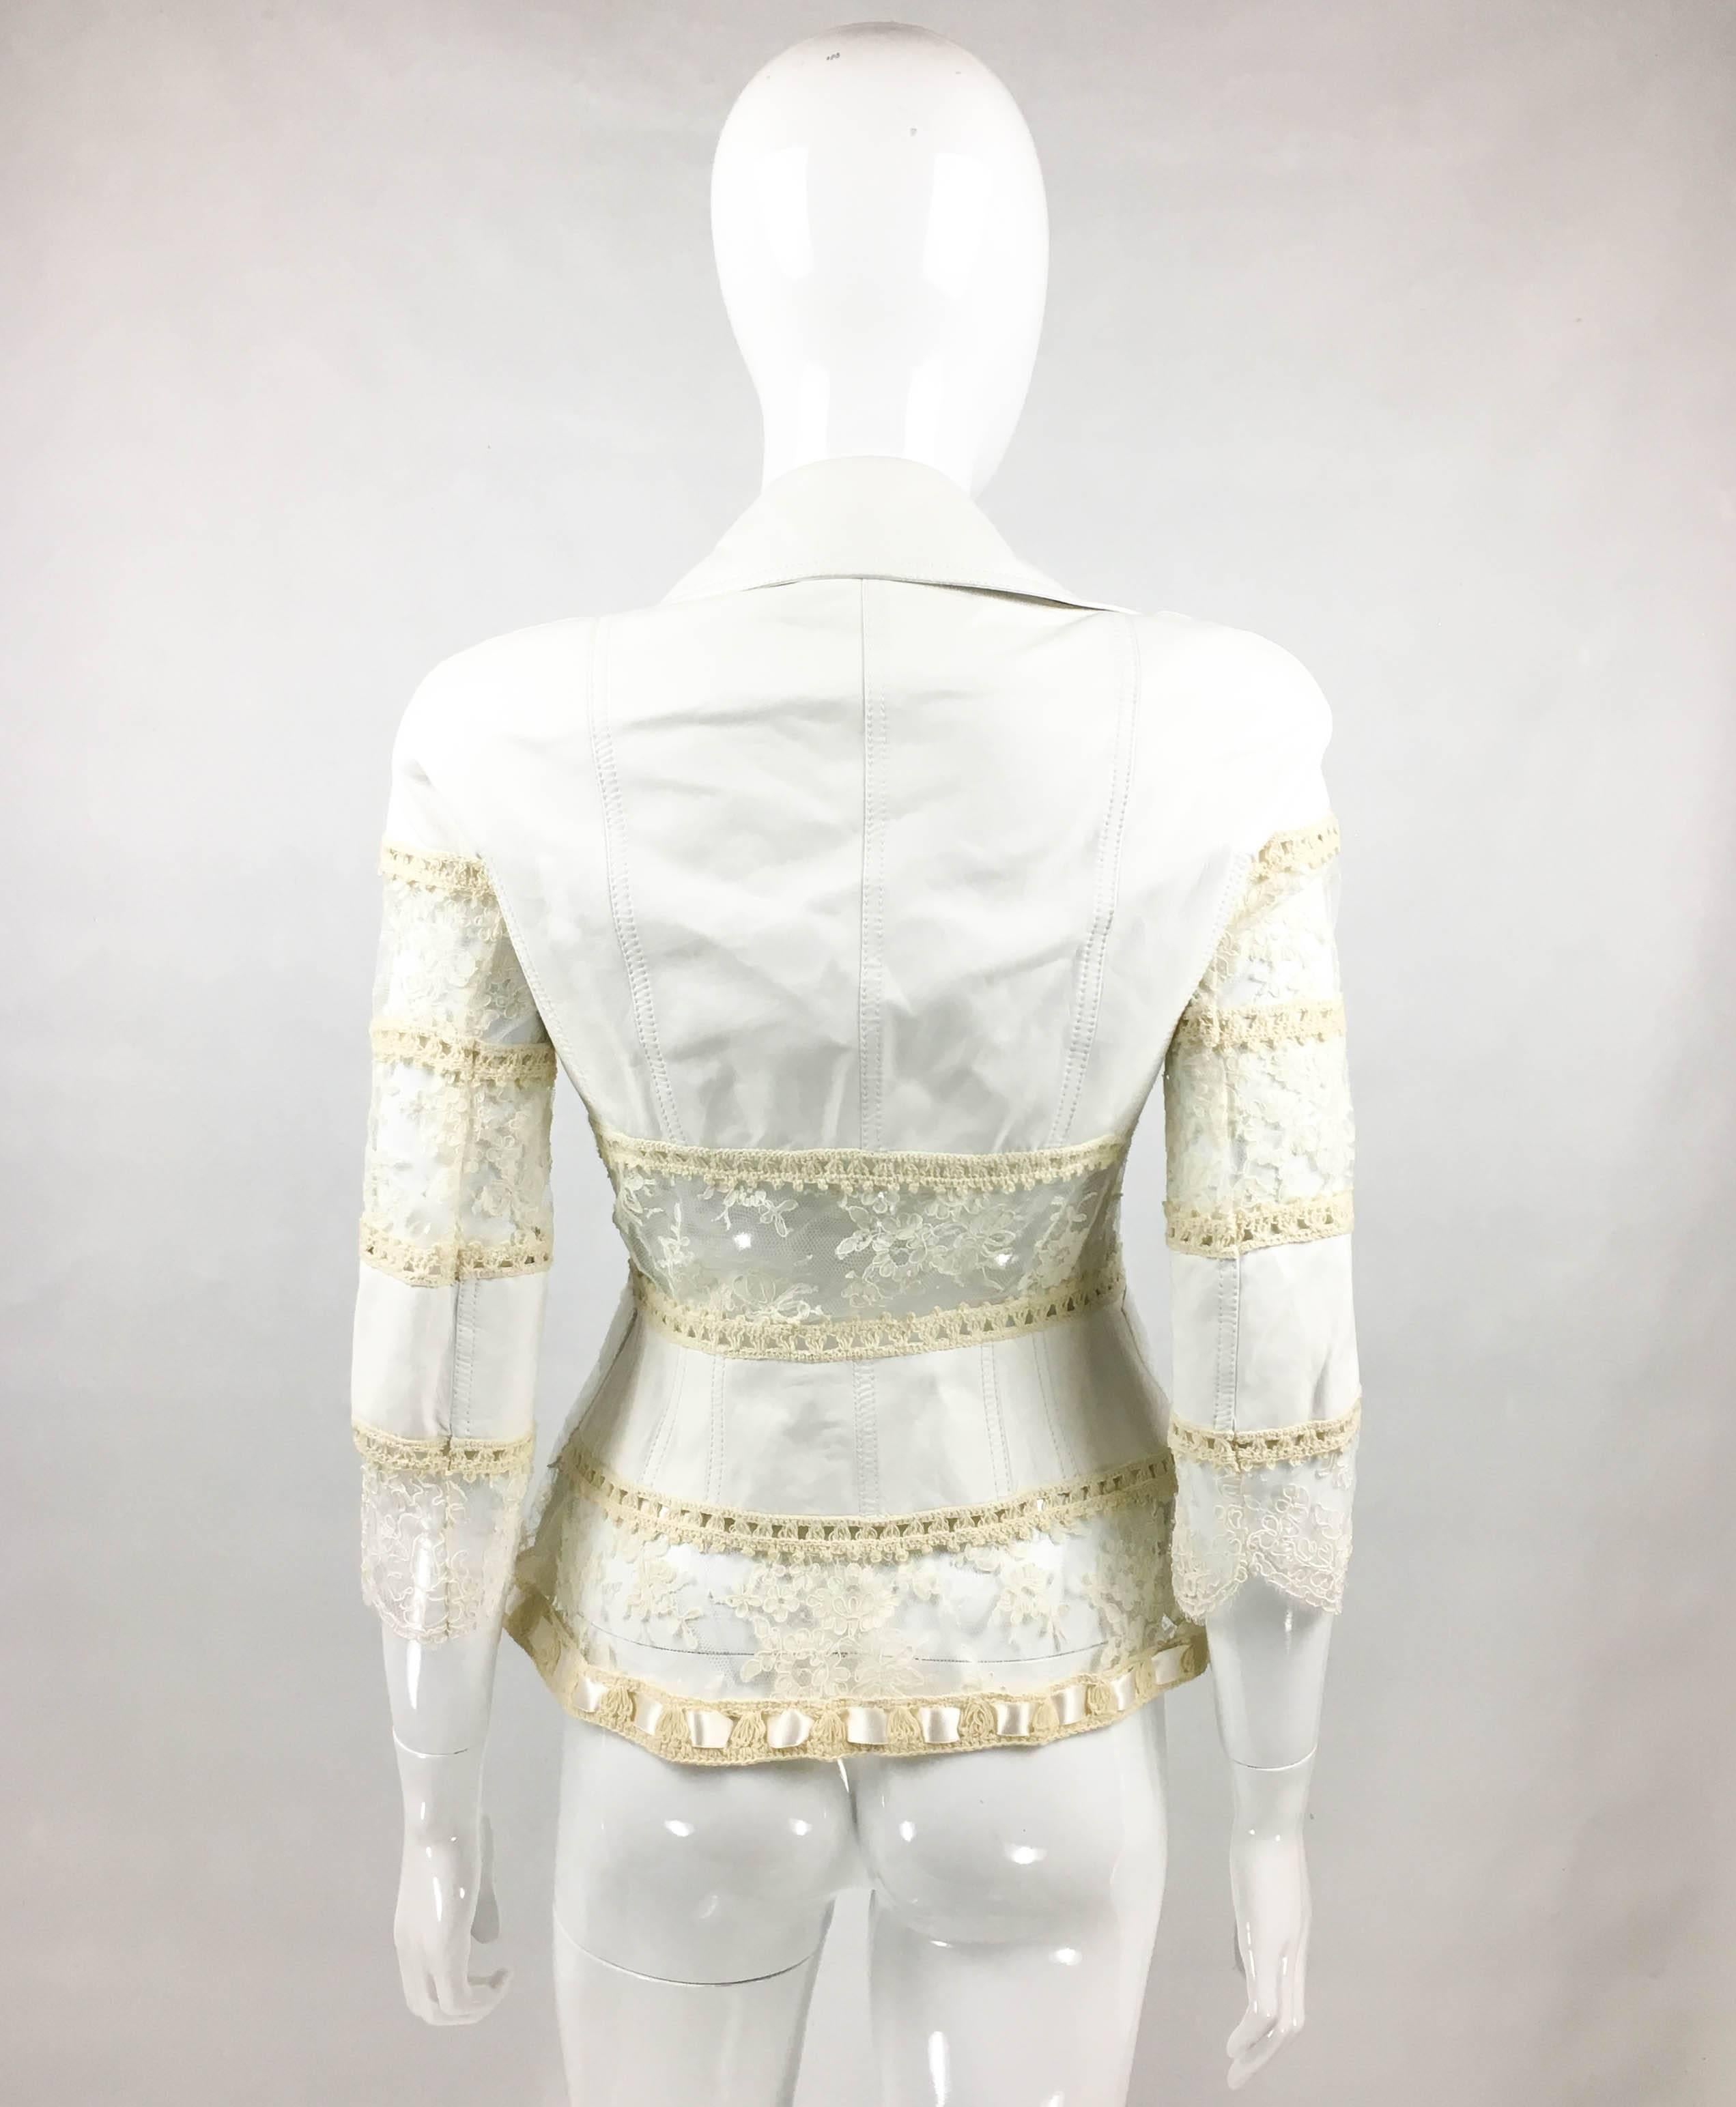 2005 Dior by Galliano Add Campaign and Runway Look White Leather and Lace Jacket 3